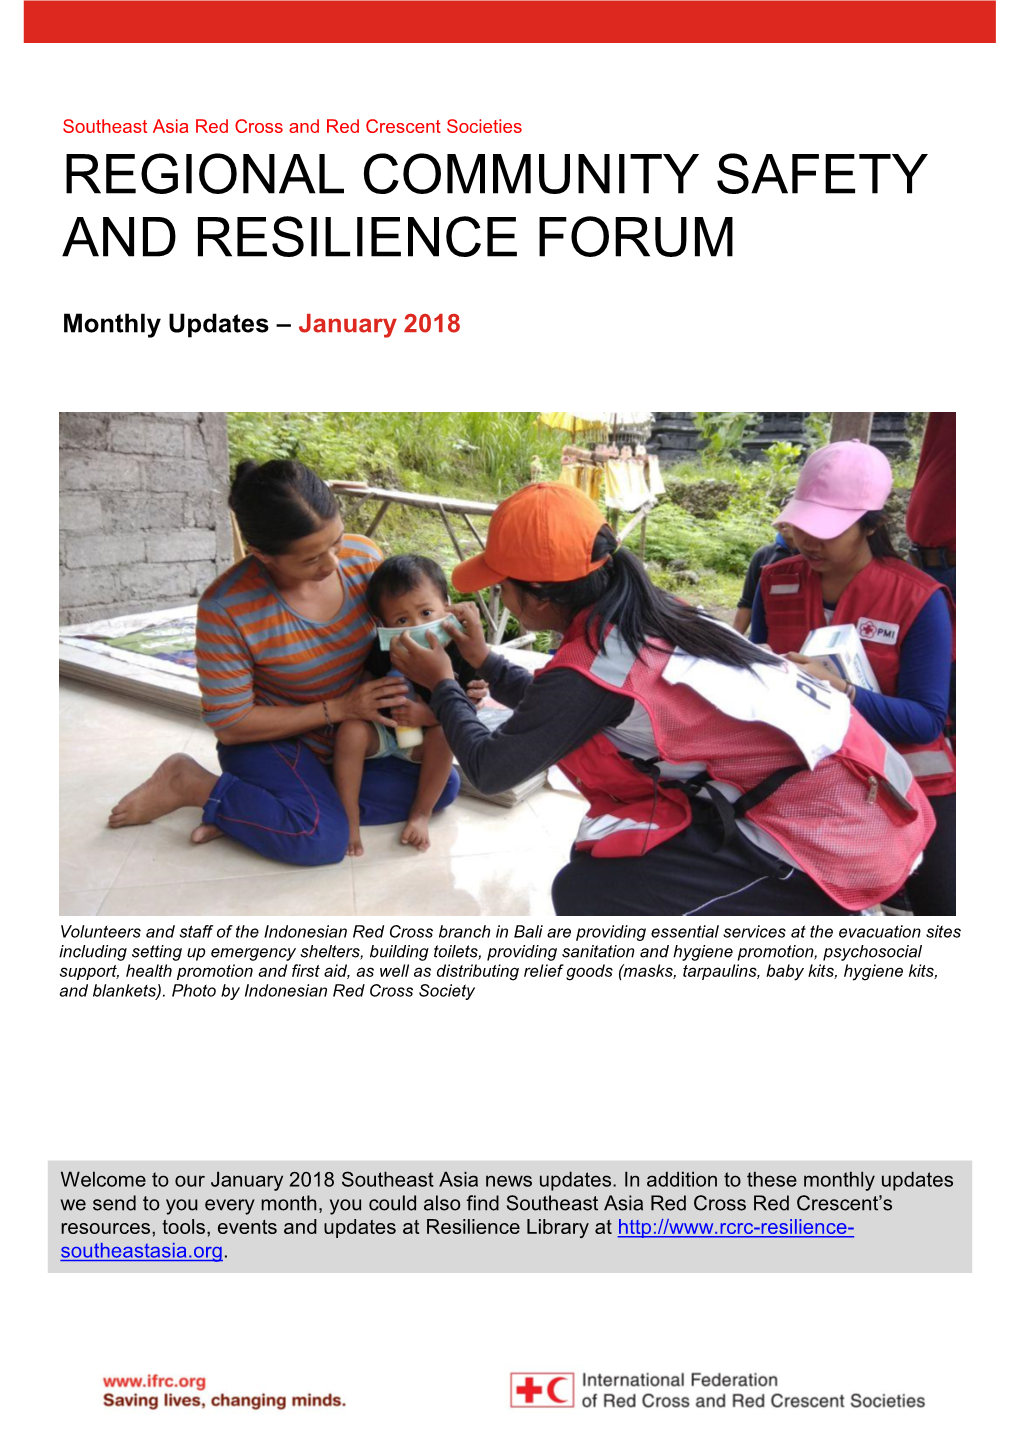 Regional Community Safety and Resilience Forum